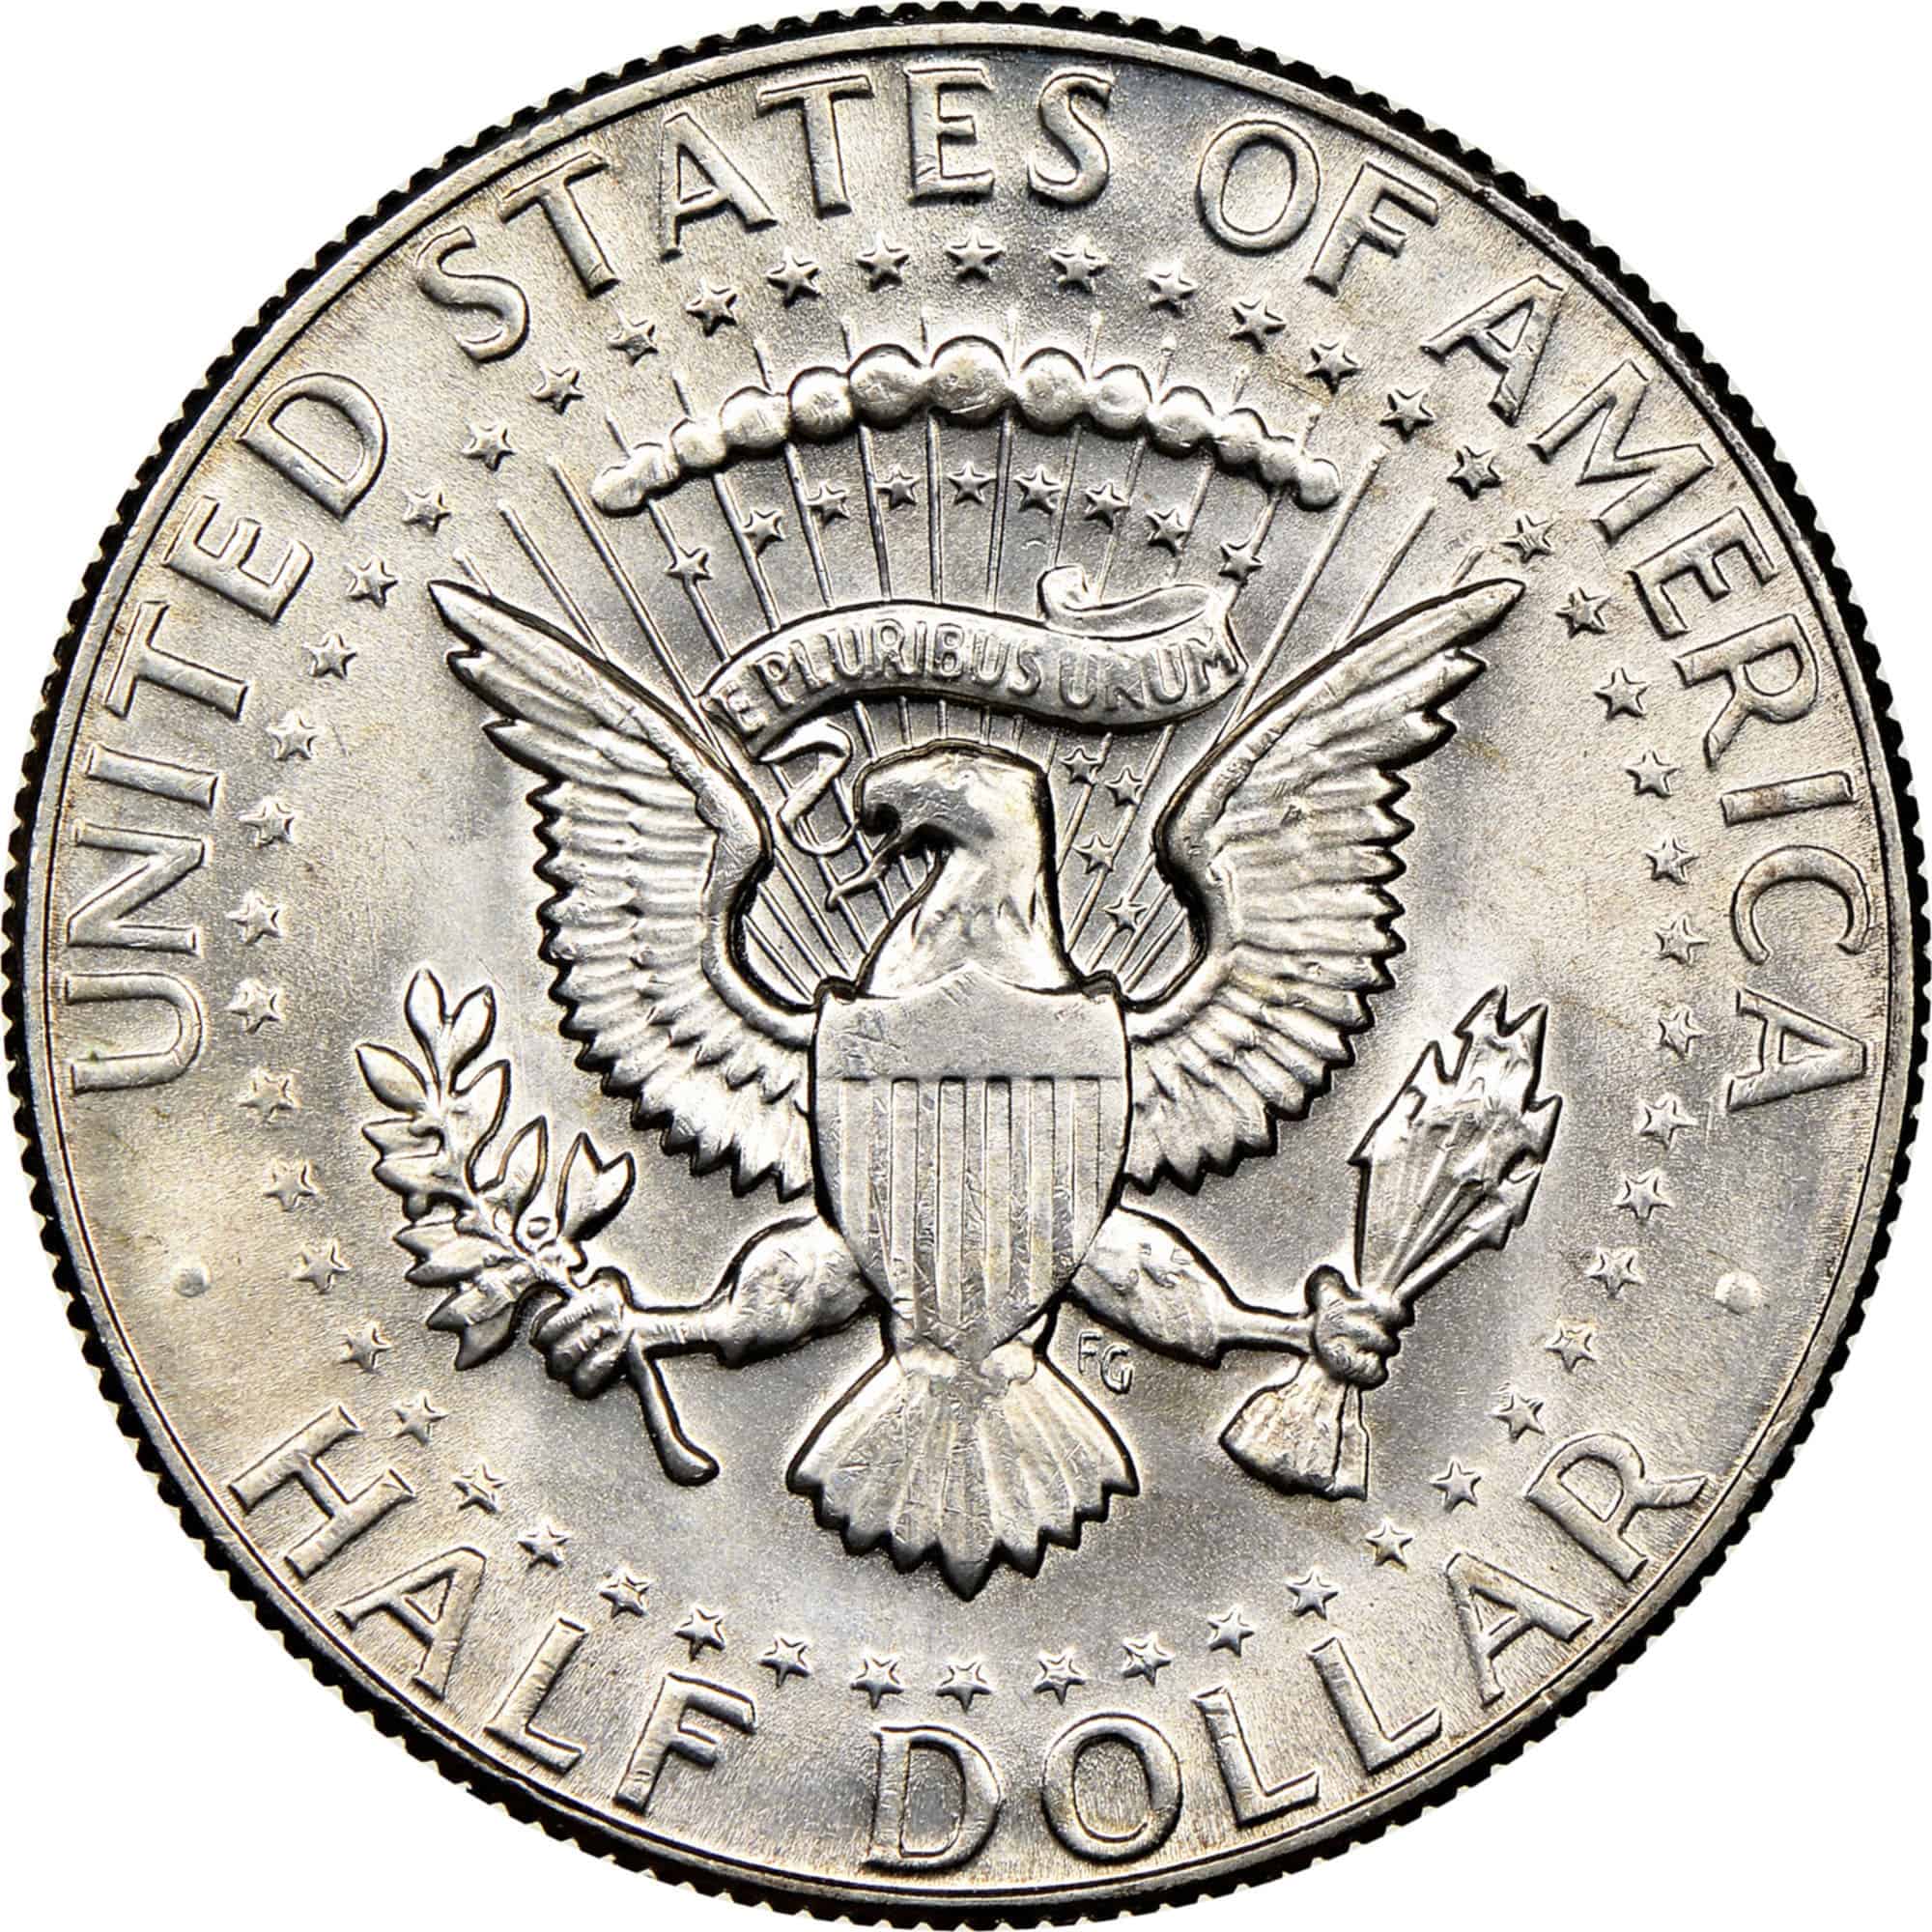 The Reverse of the 1969 Half Dollar